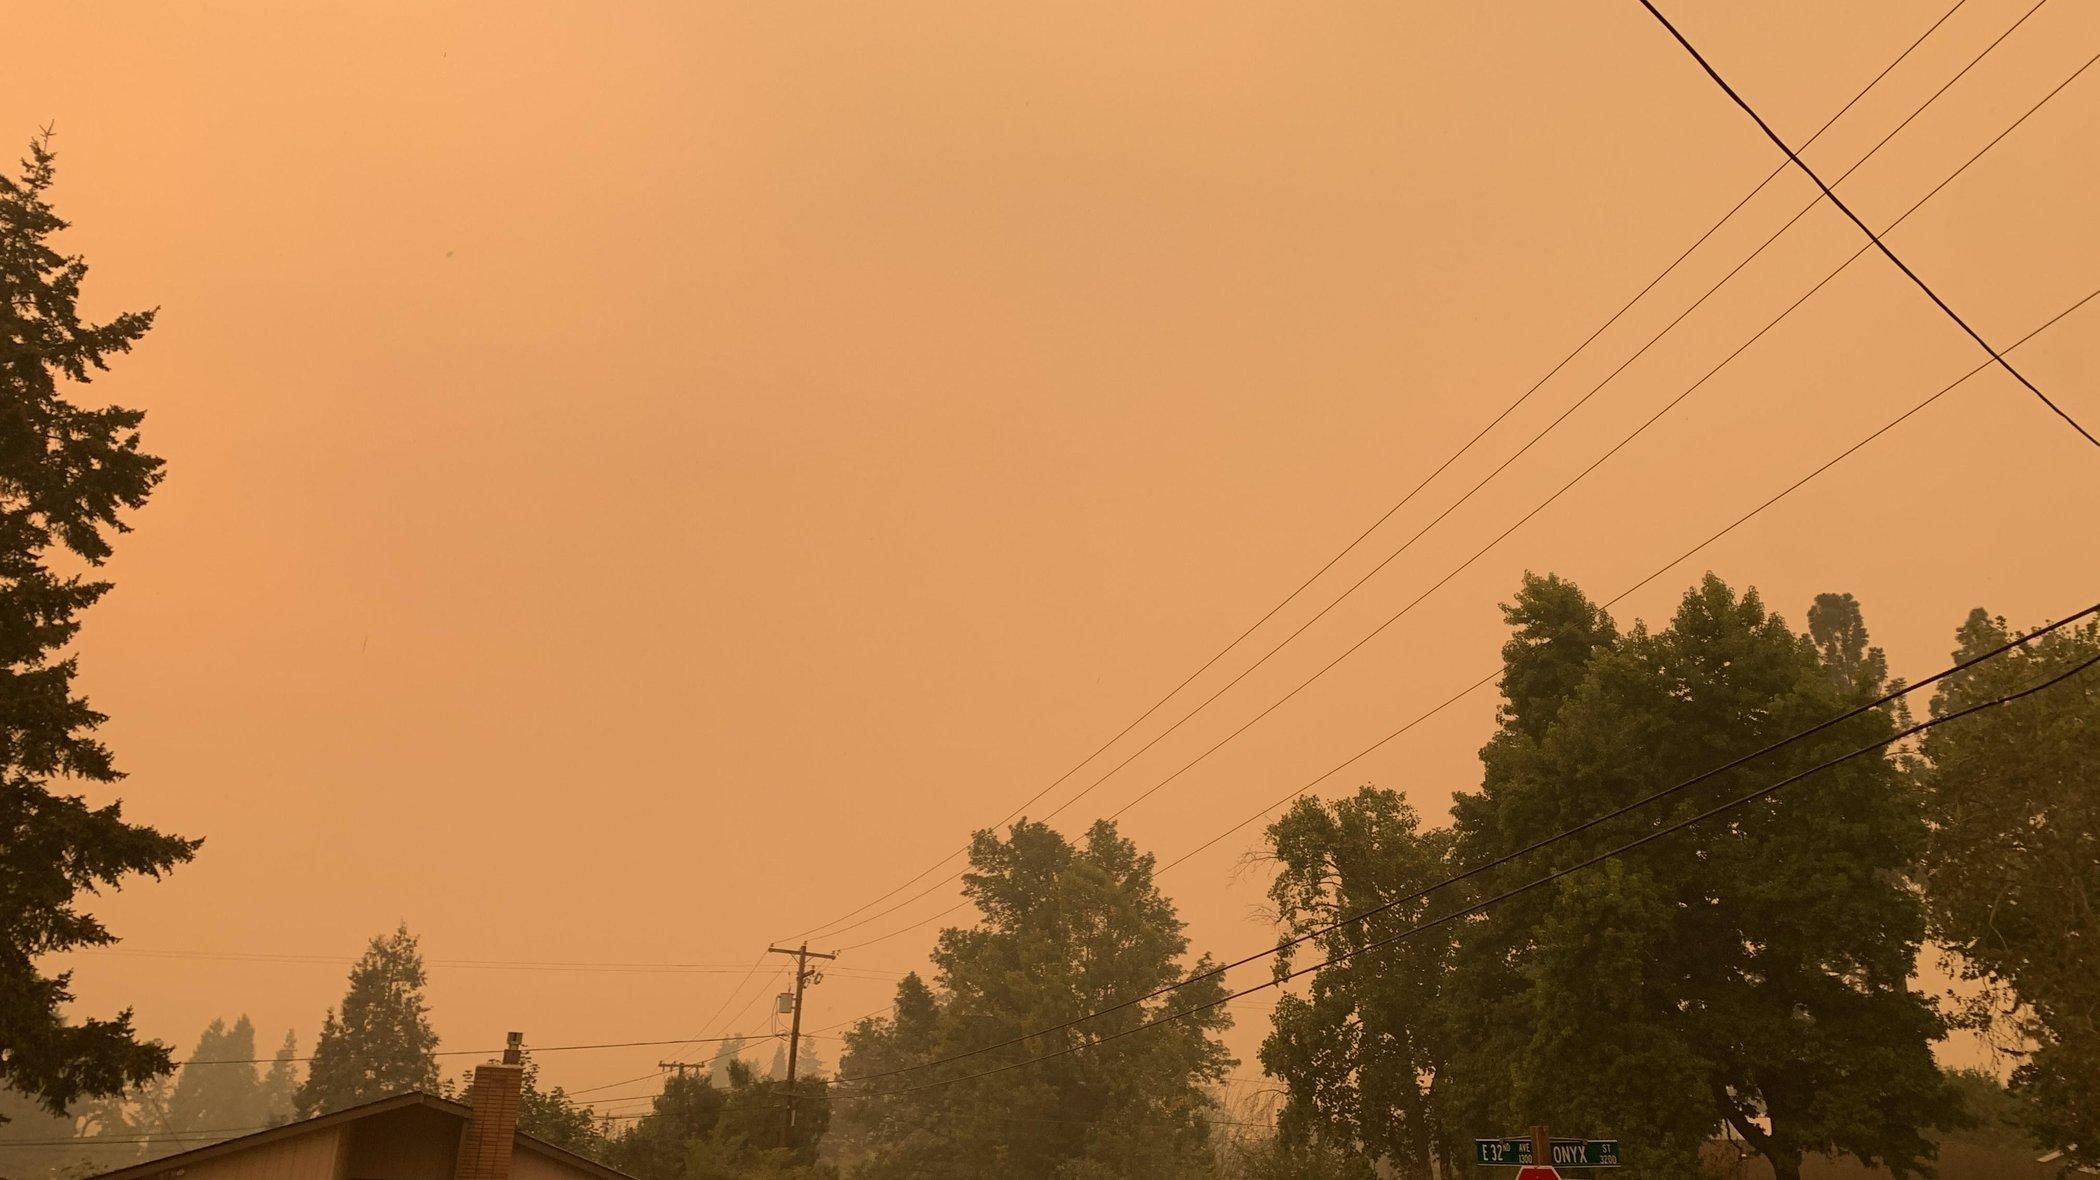 Nearby wildfires bring very smoky conditions to a neighborhood in south Eugene on September 8. (Photo: Taylor Griggs)